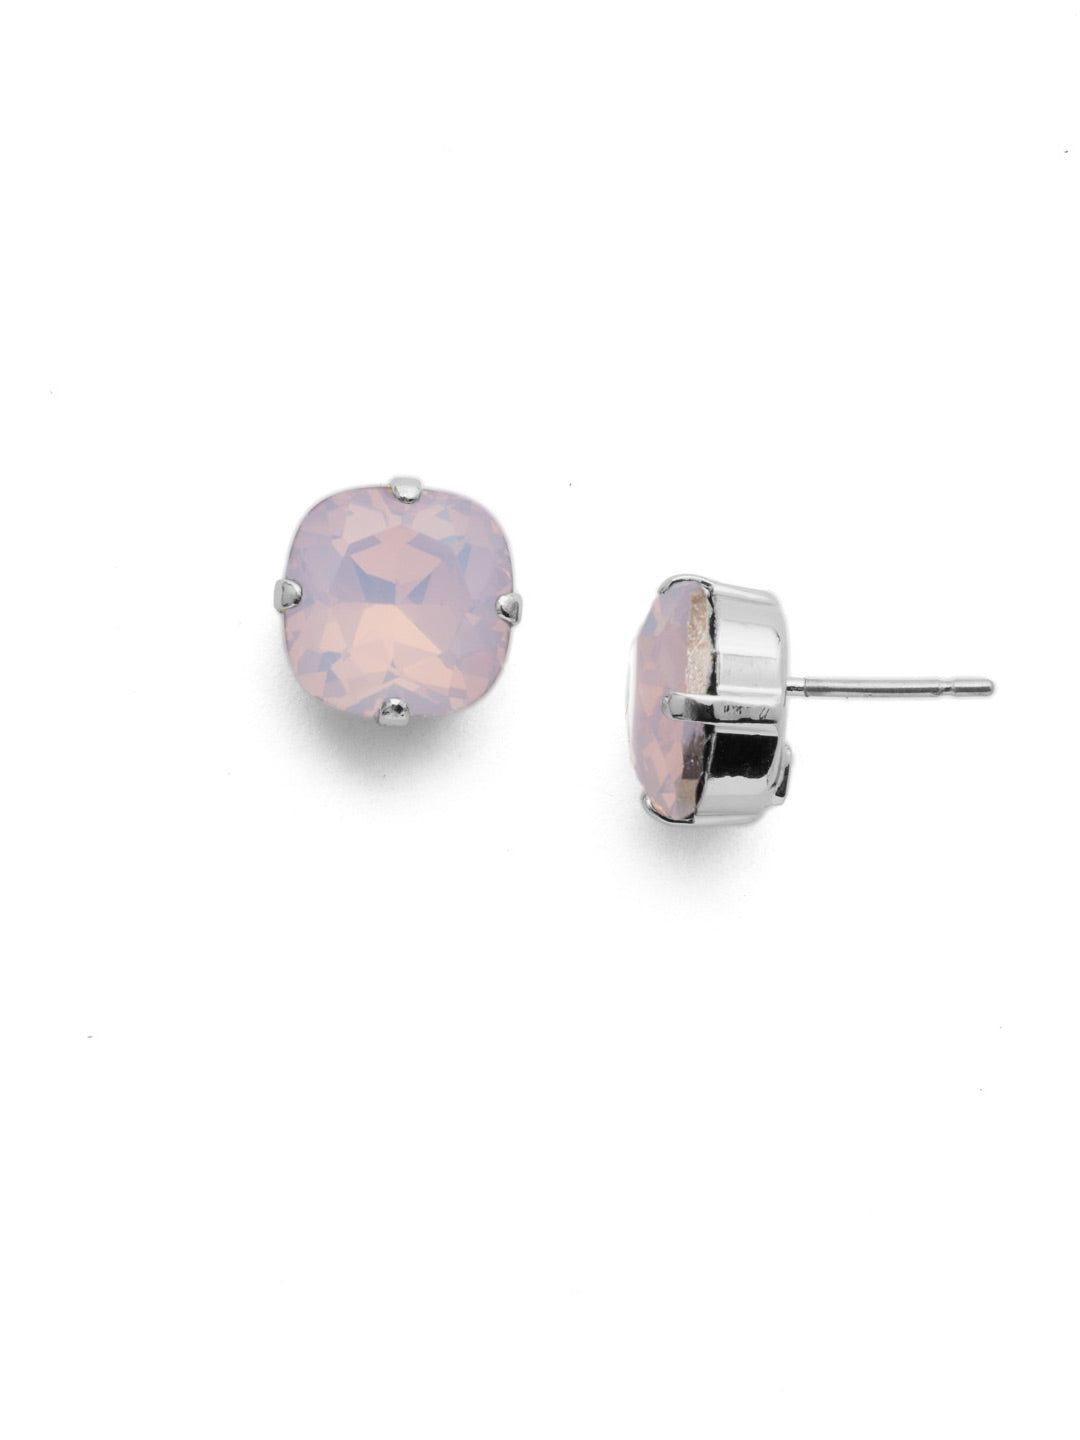 Halcyon Stud Earrings - EDH25PDROW - <p>A beautiful, luminous cushion-cut crystal in a classic four-pronged setting that's ideal for everyday wear. From Sorrelli's Rose Water collection in our Palladium finish.</p>